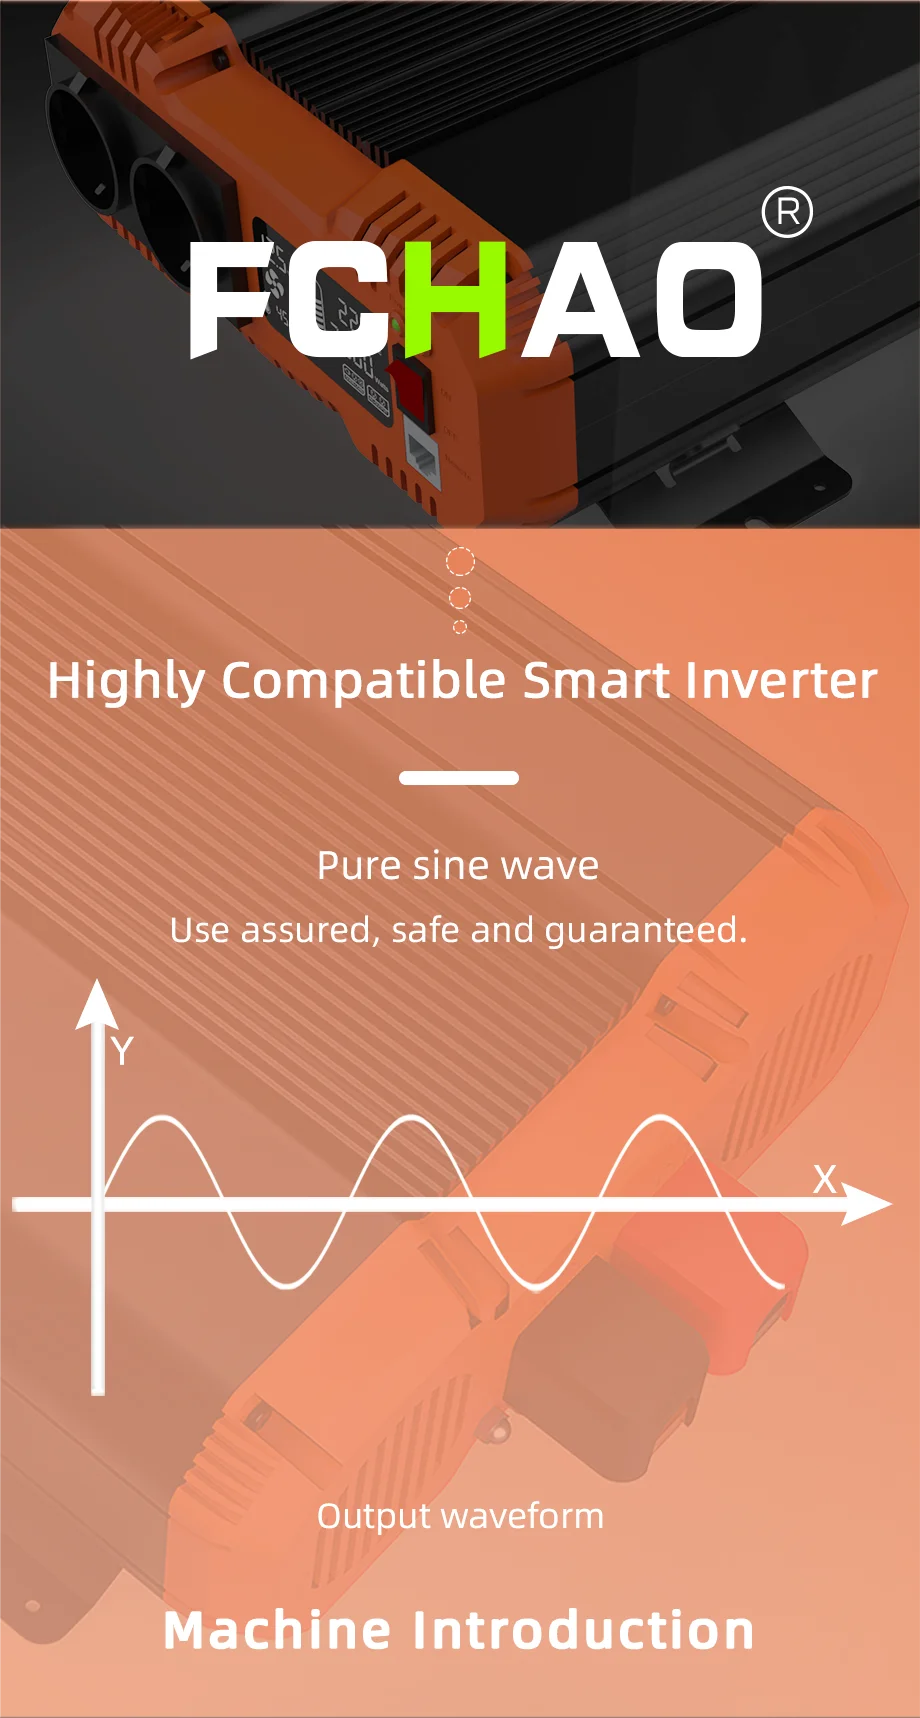 FCHAO 5000W Car Power Inverter, Pure sine wave inverter provides safe and reliable power output.